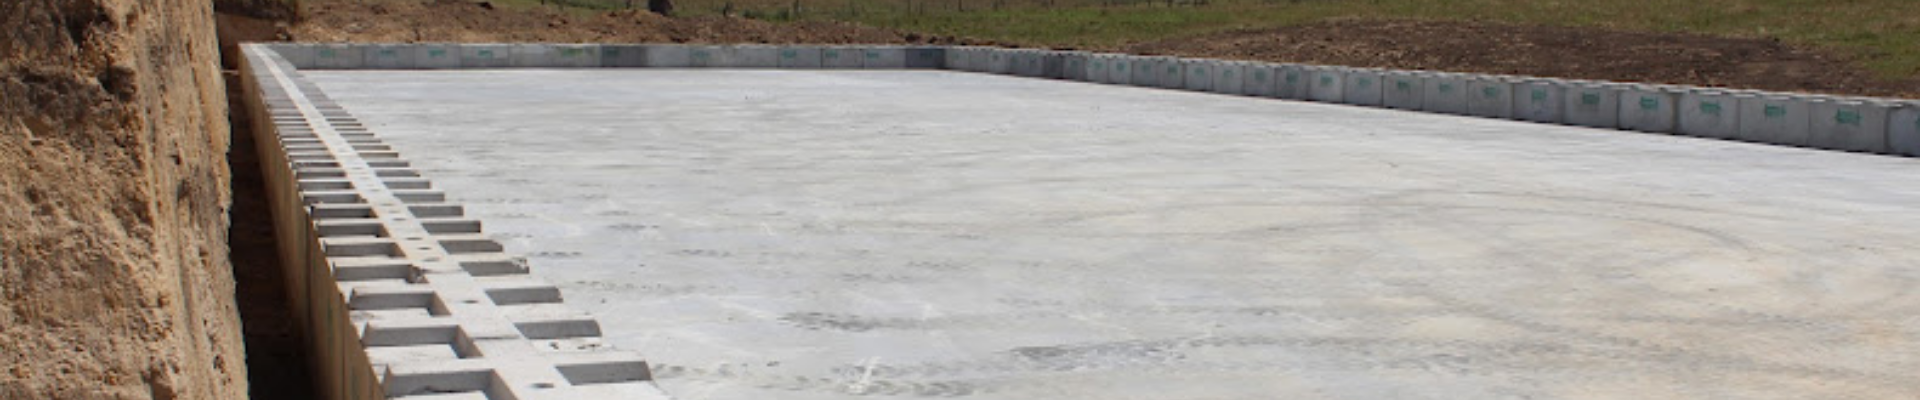 Wide shot of a silage bunker made with Interbloc concrete blocks